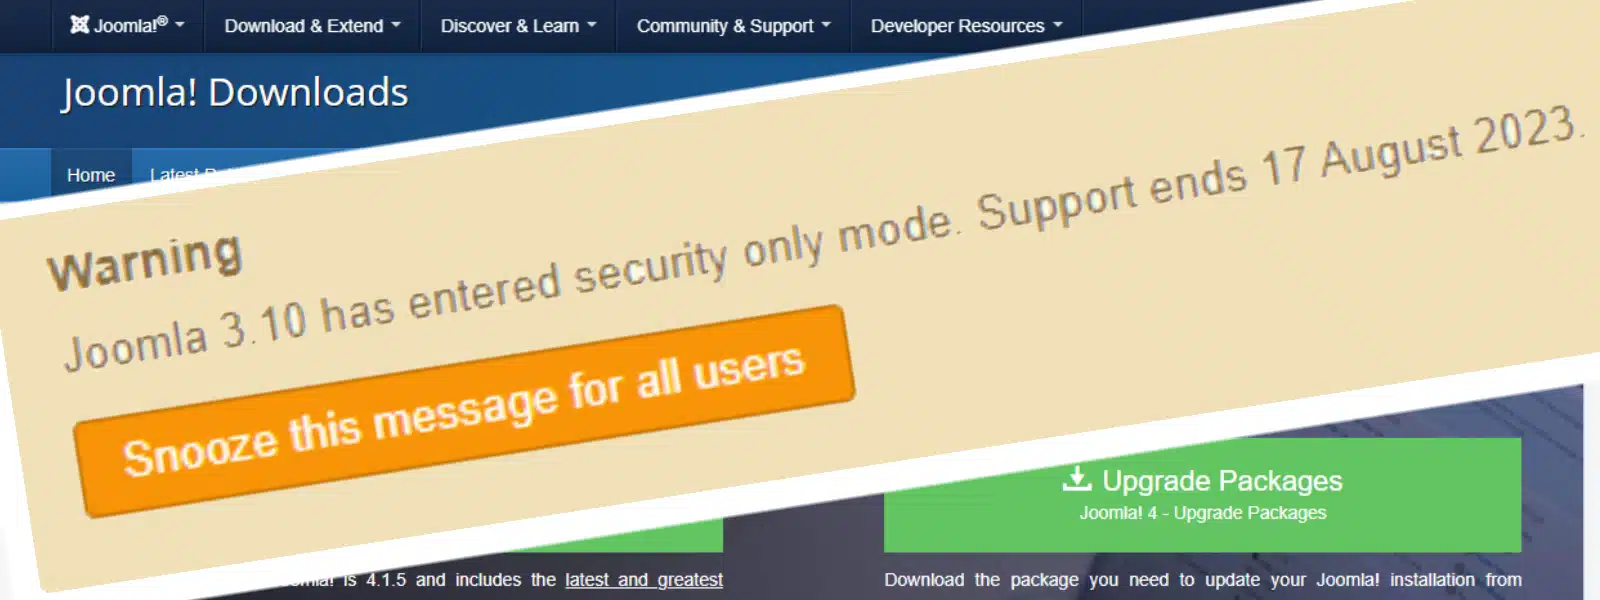 Joomla 3.10 has entered security only mode. Support ends 17 August 2023 Box Links